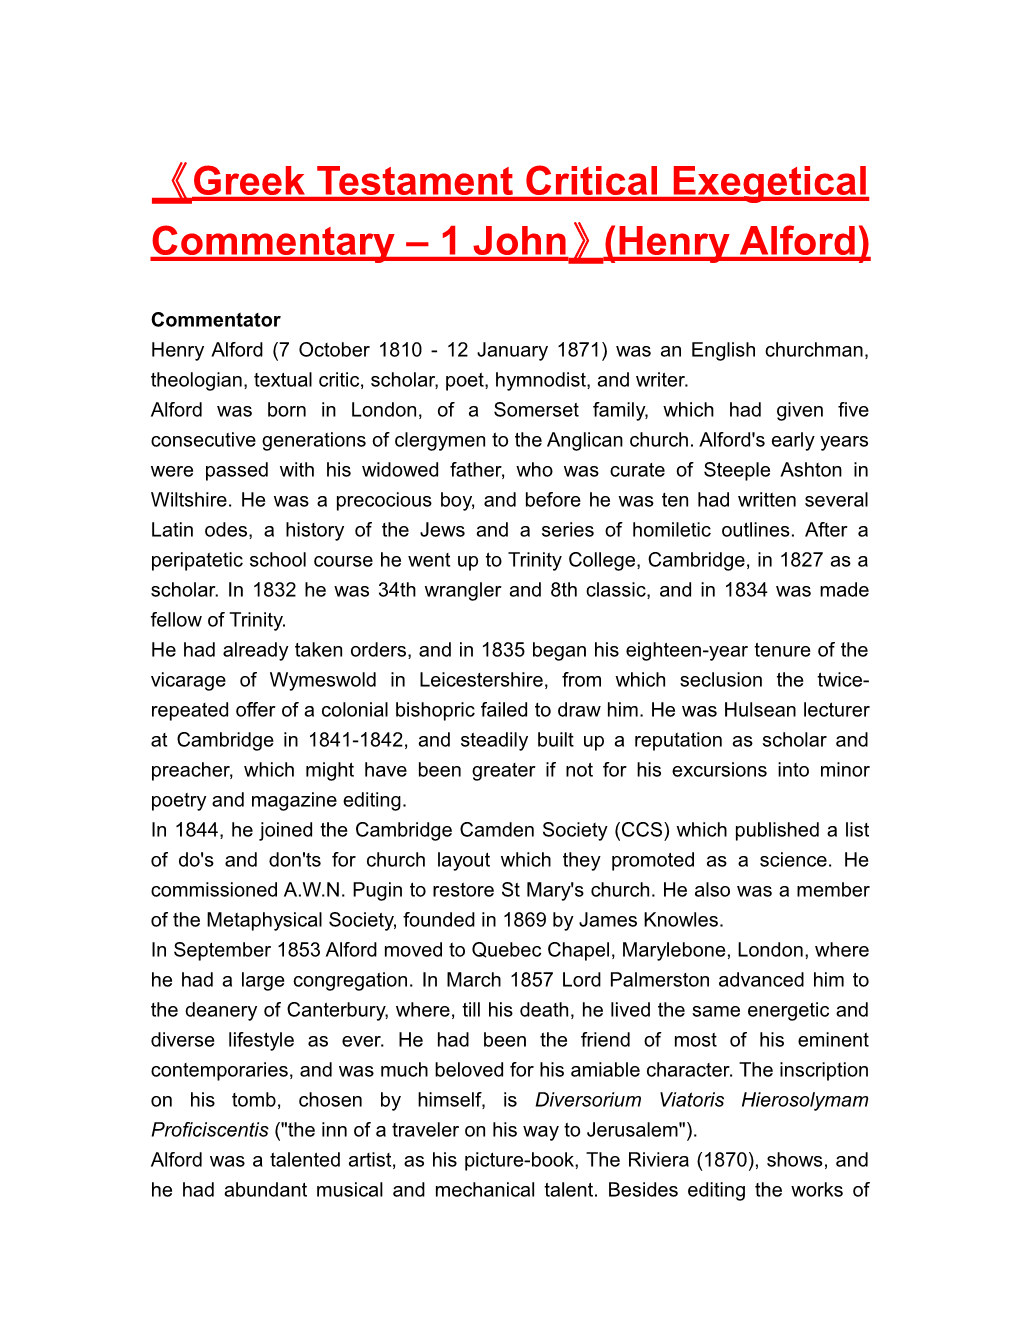 Greektestament Critical Exegetical Commentary 1 John (Henry Alford)